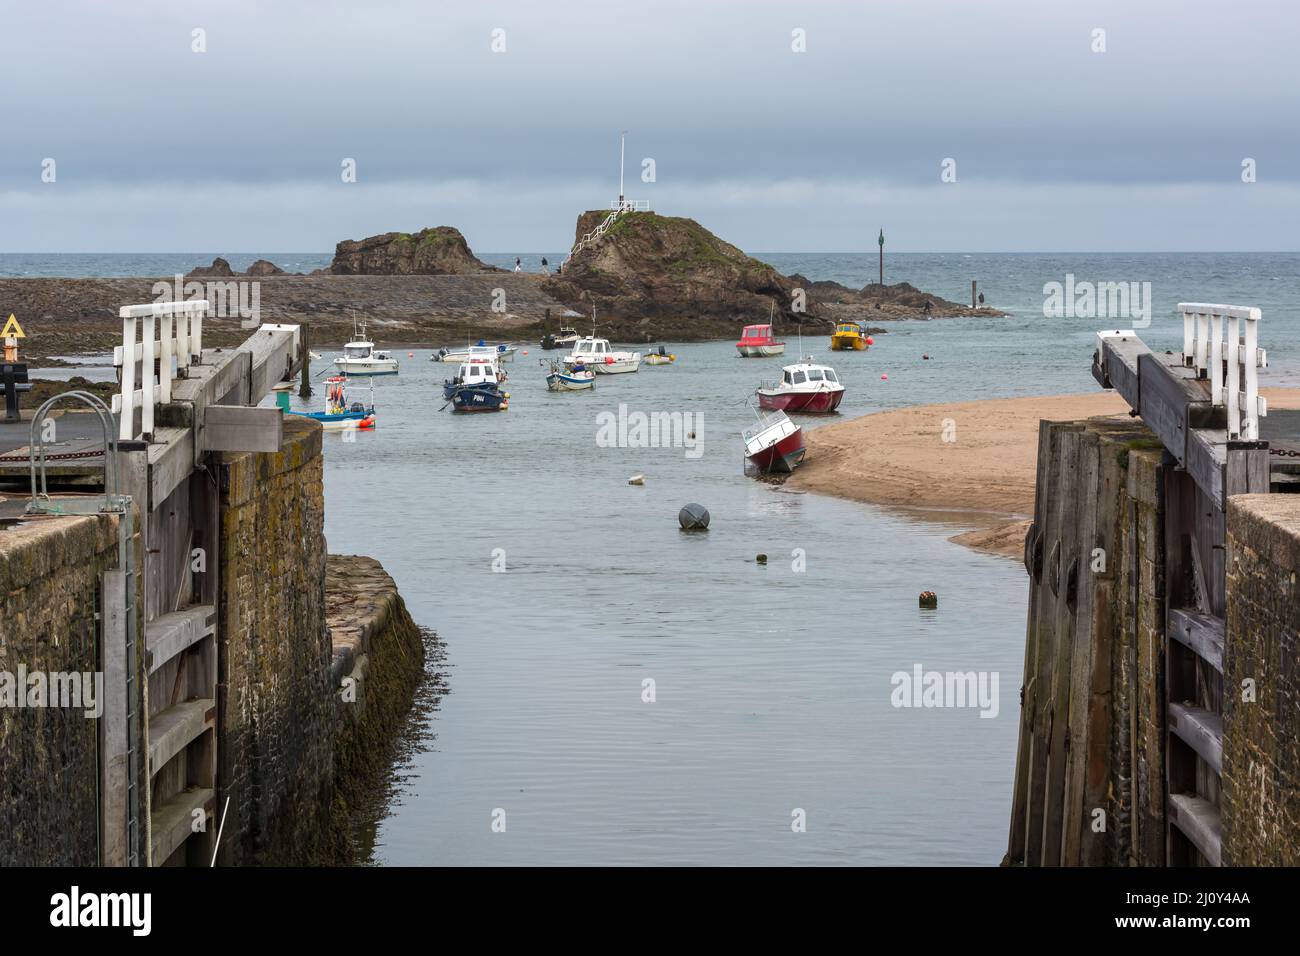 BUDE, CORNWALL/UK - AUGUST 15 : Boats in the harbour at Bude on August 15, 2013. Unidentified people. Stock Photo